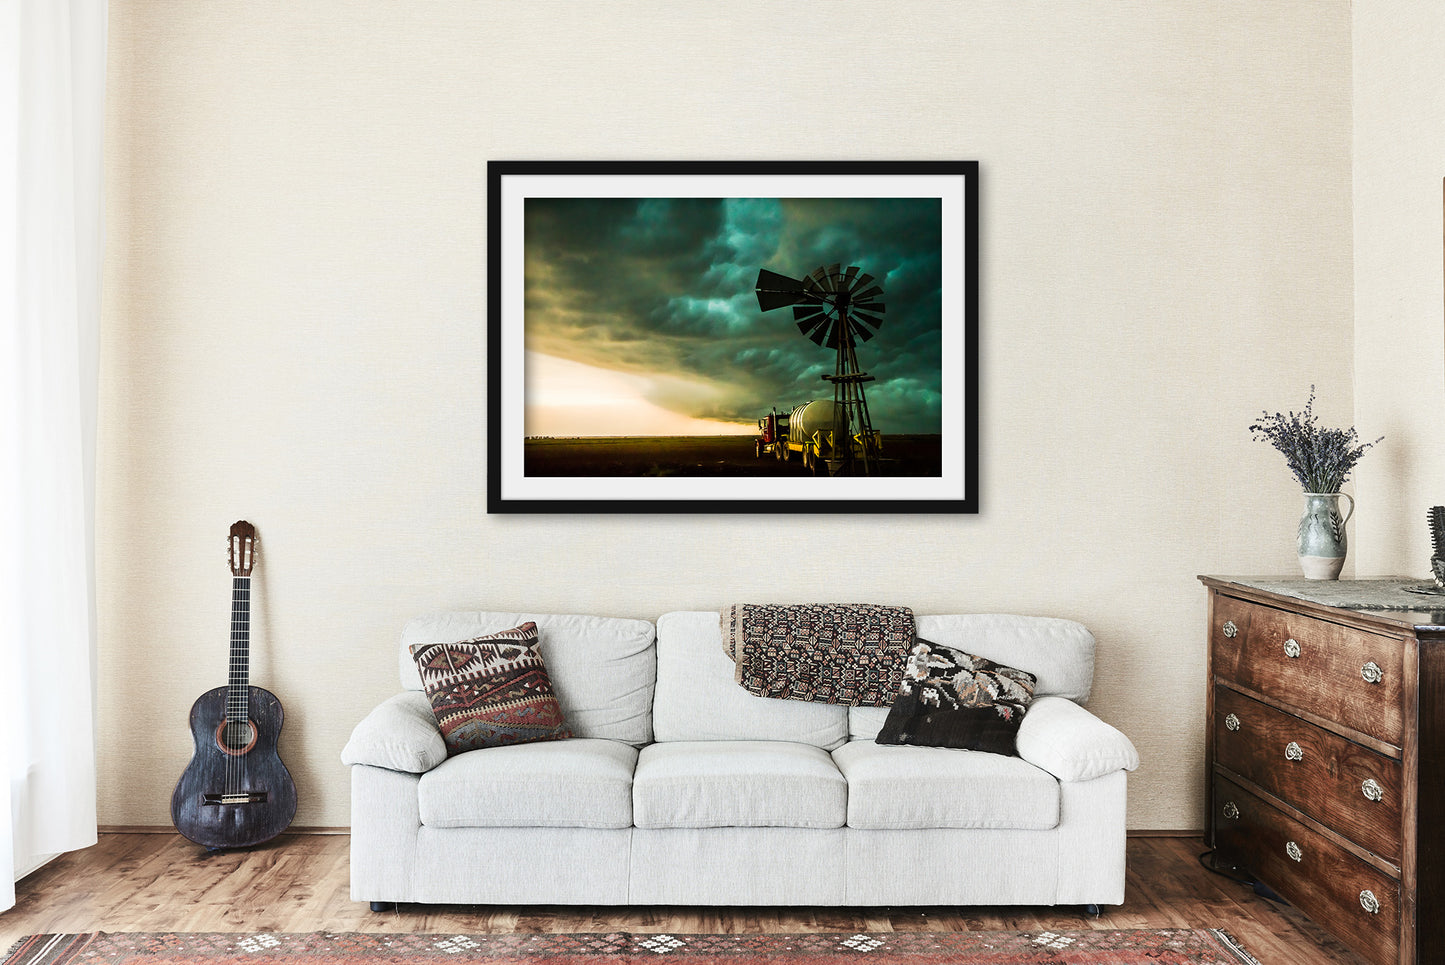 Framed Country Print - Ready to Hang Picture of Windmill and Truck Under Storm Clouds in Oklahoma - Western Plains Landscape Photo Artwork